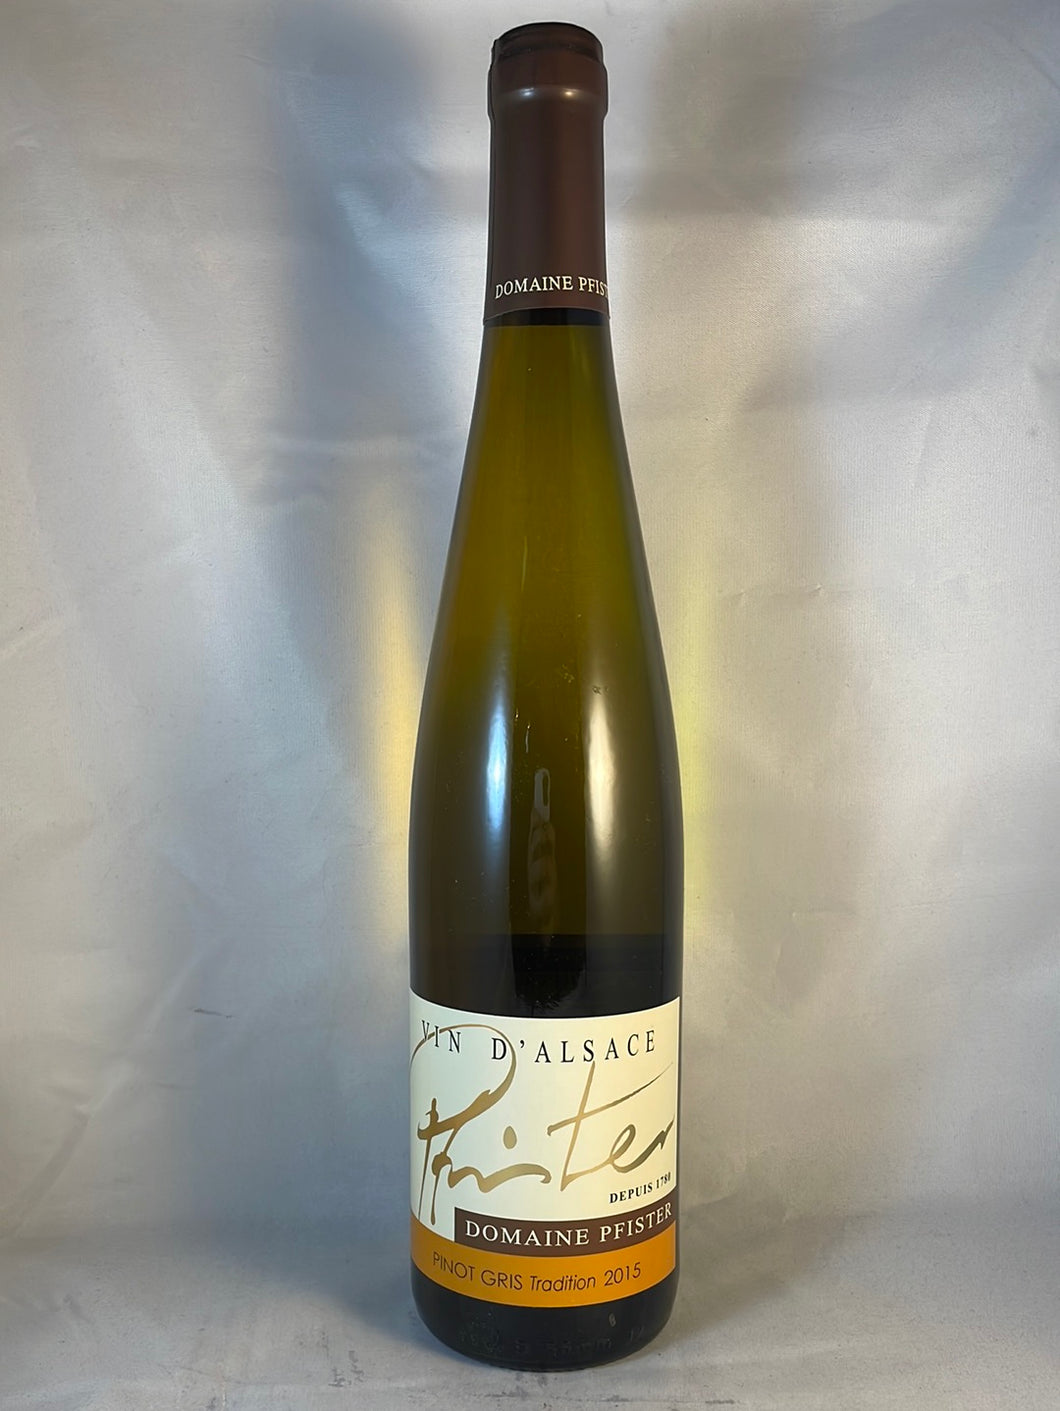 Domaine Pfister Vin D'Alsace Pinot Gris Tradition 2015